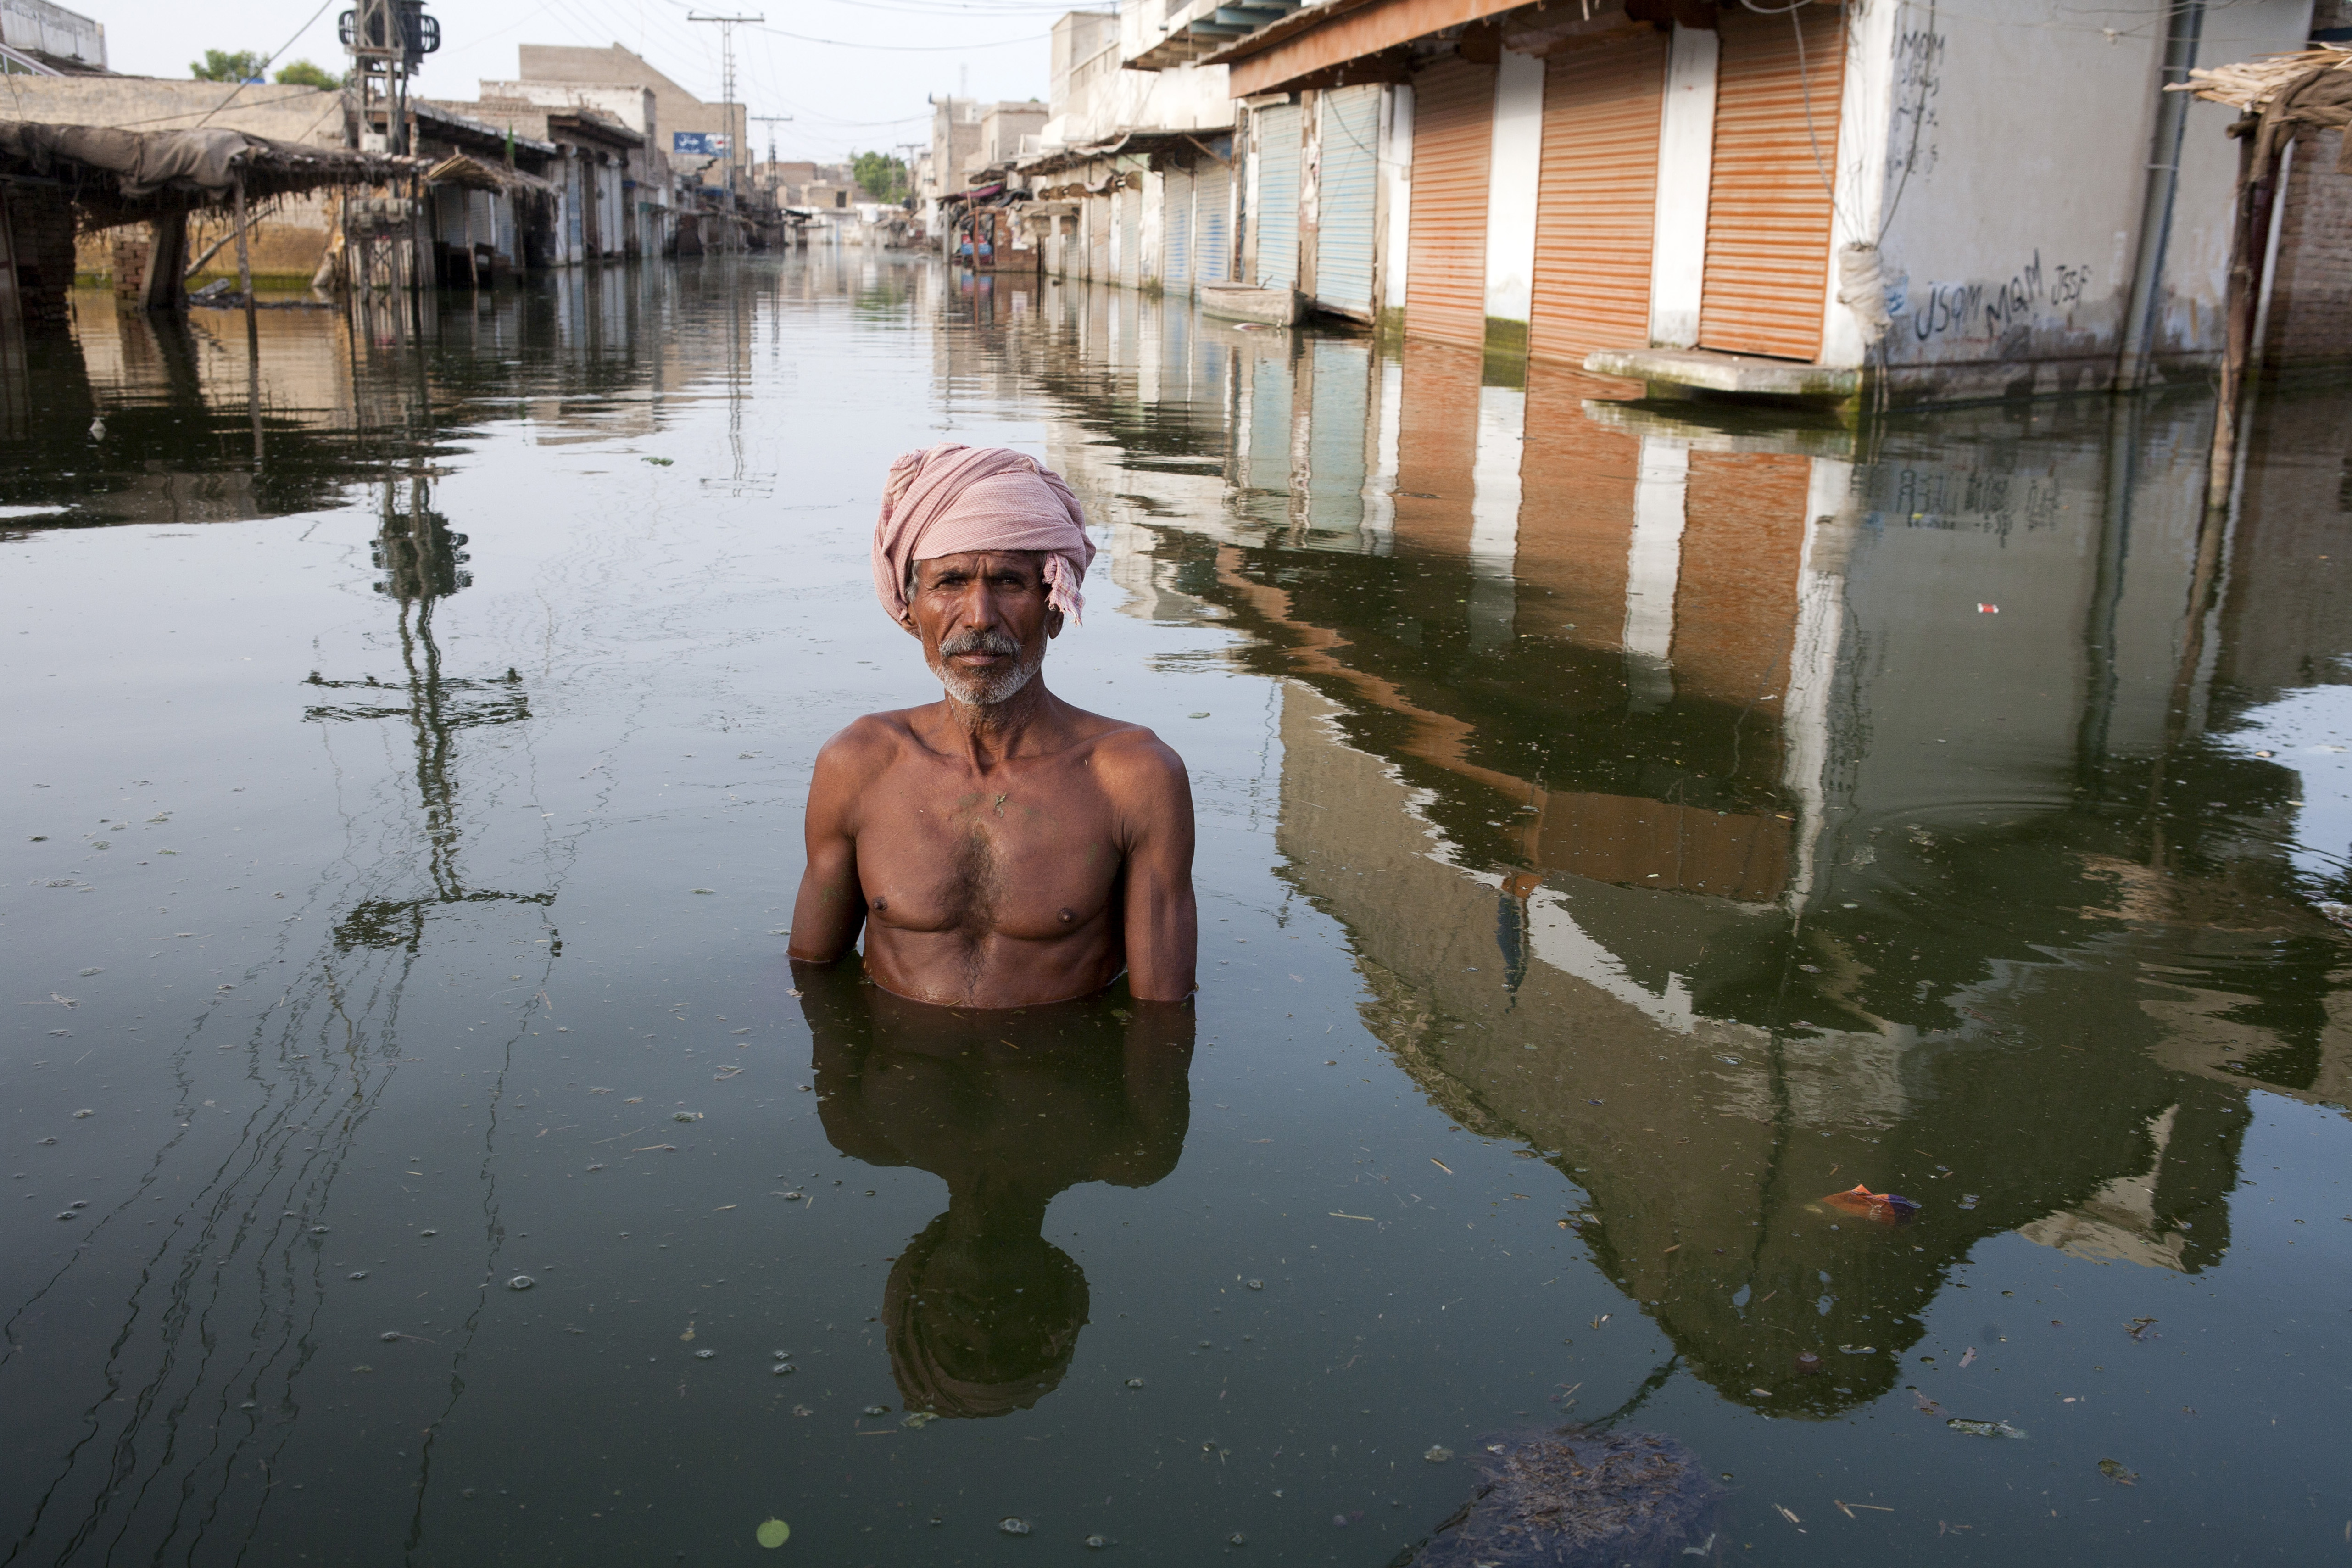 A man named Ahmed stands in the flooded town of Khairpur Nathan Shah in Pakistan in 2010. Photo: Gideon Mendel For Action Aid/ In Pictures/Corbis via Getty Images